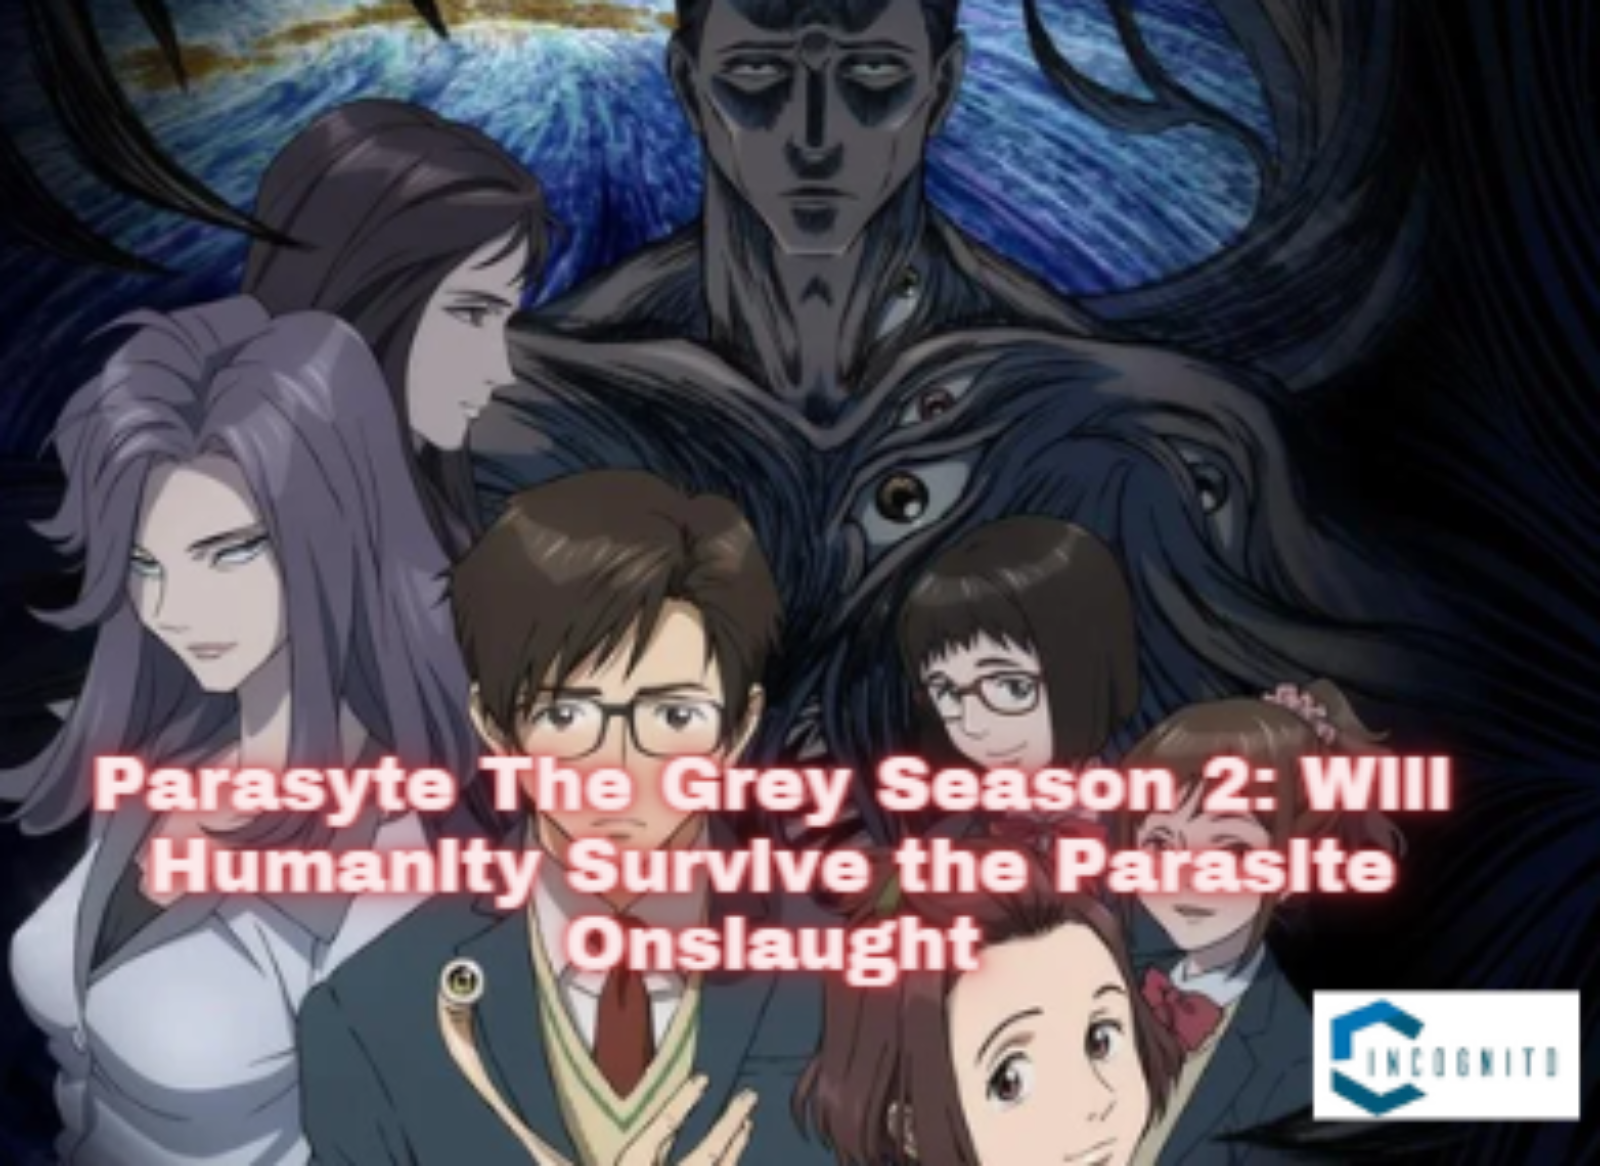 Parasyte The Grey Season 2: Will Humanity Survive the Parasite Onslaught